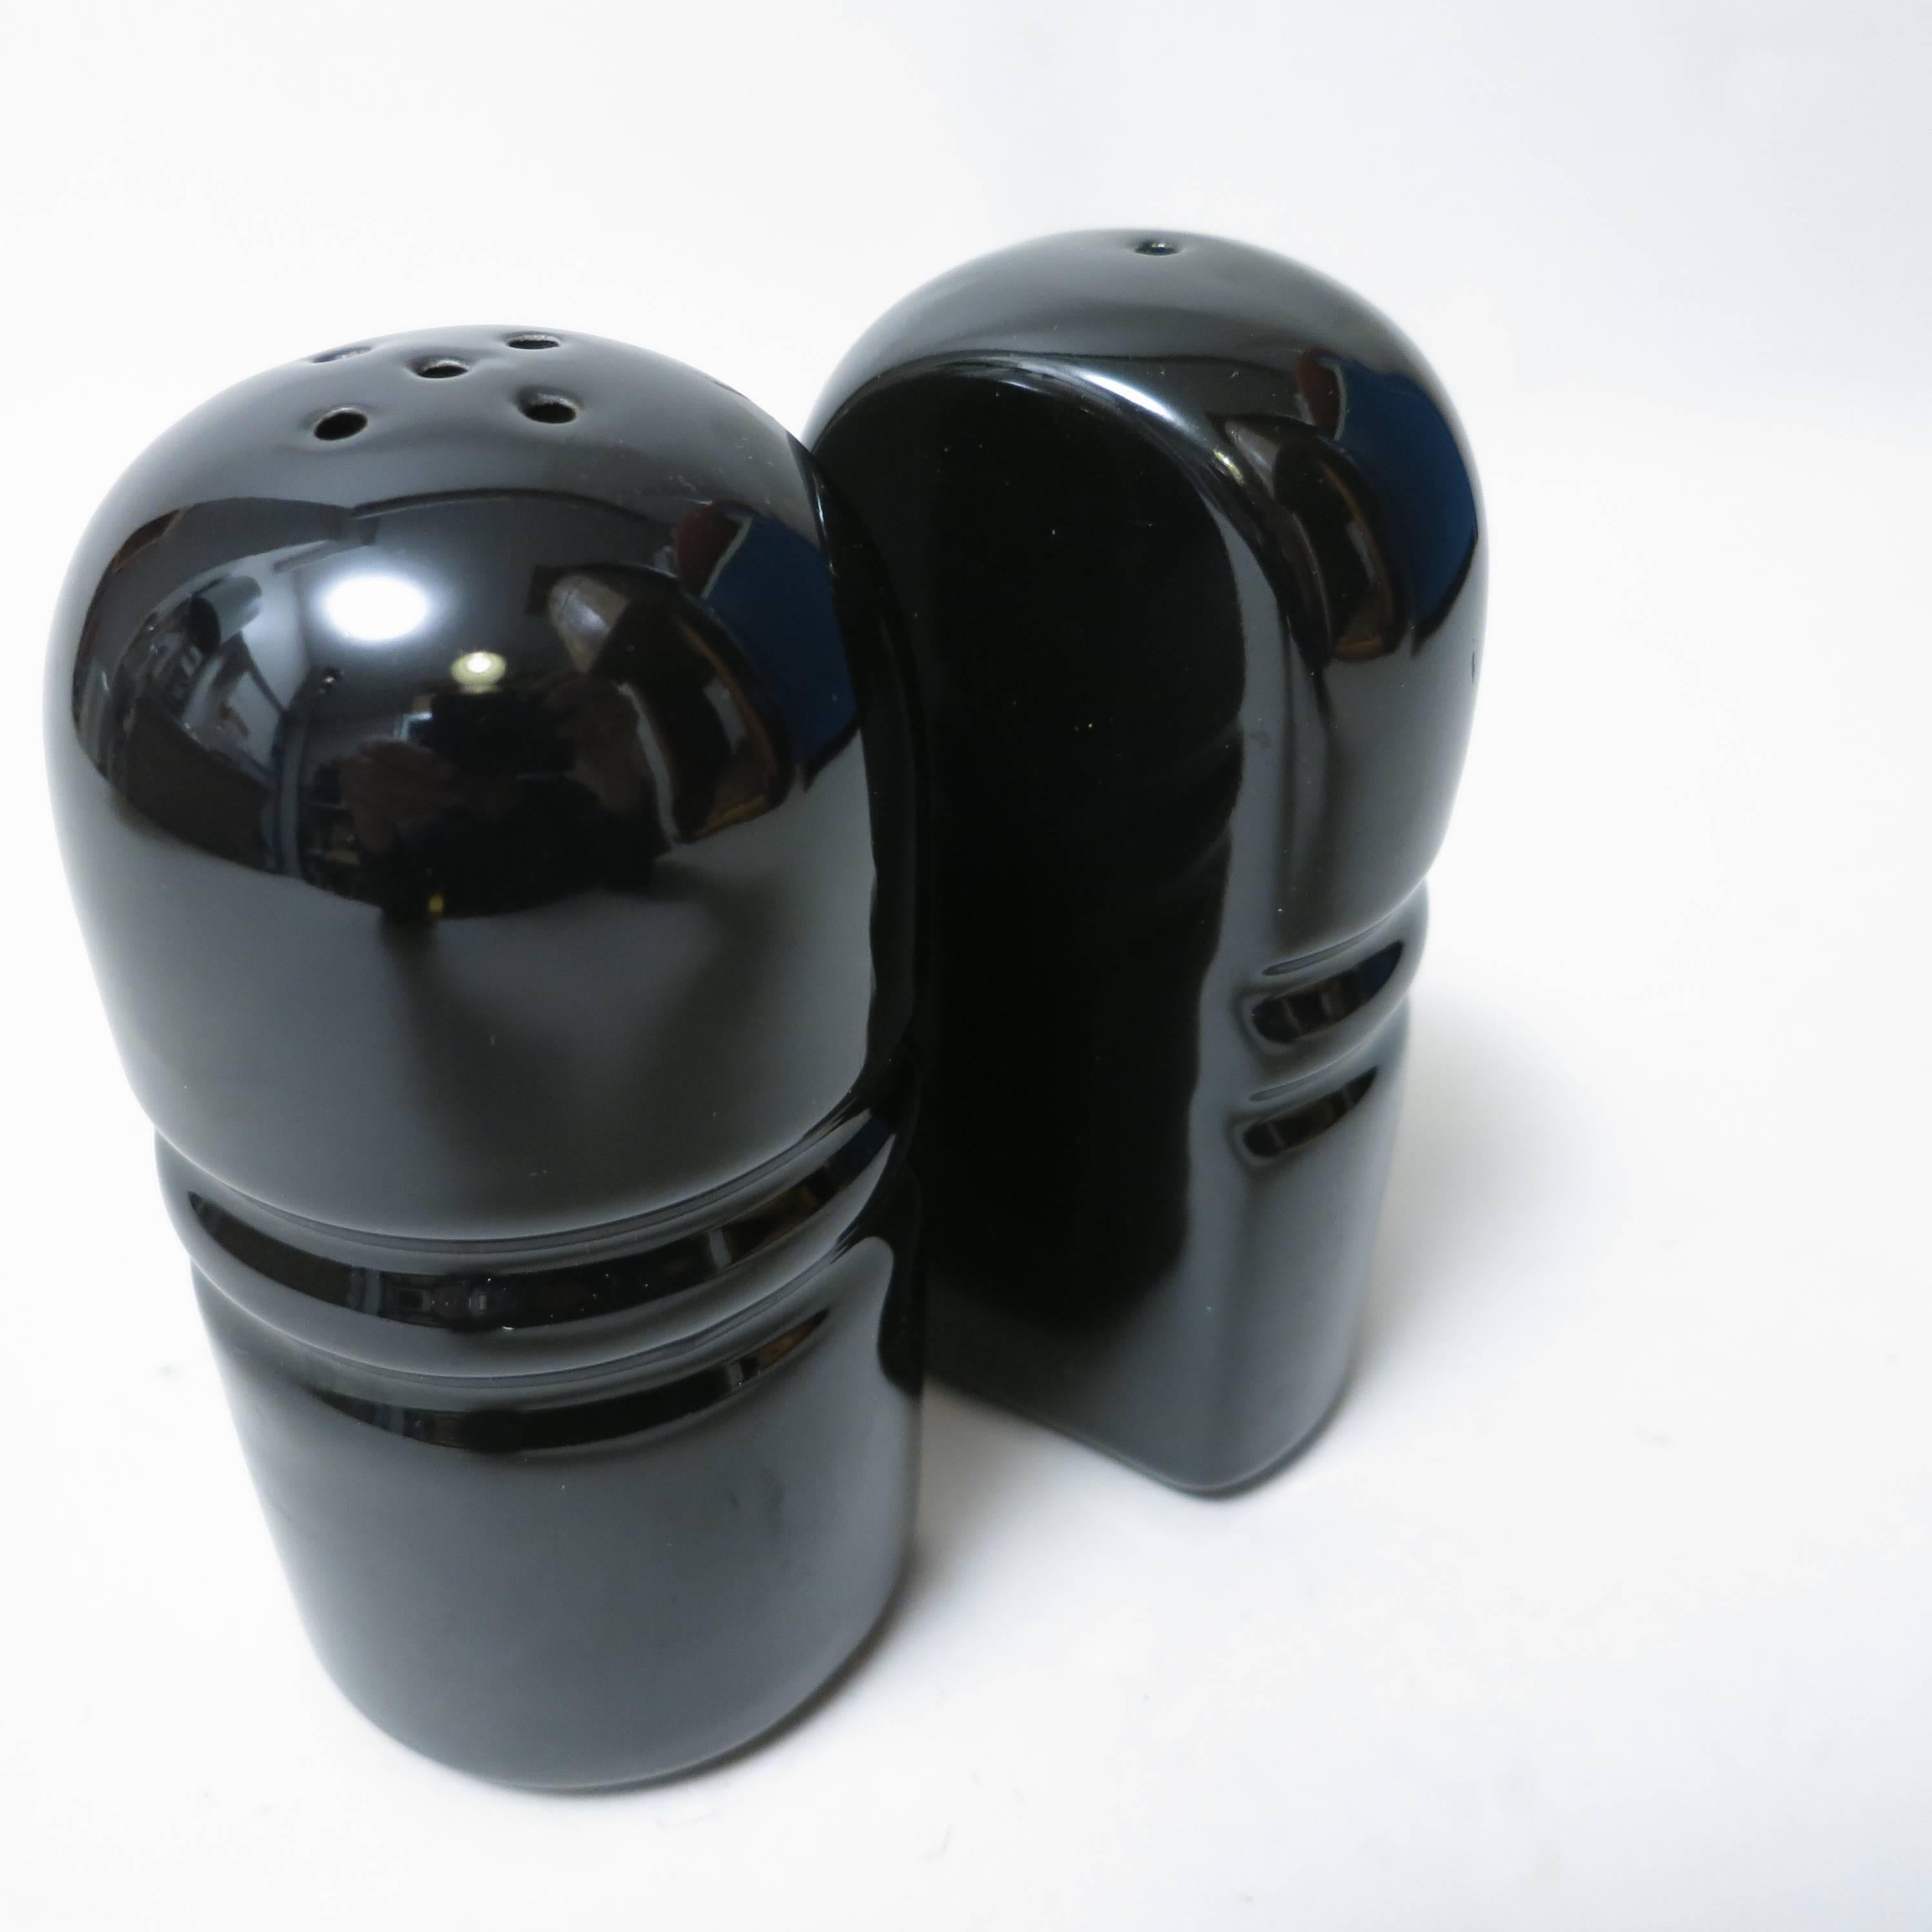 Mid-Century Modern Salt and Pepper Shakers by Pino Spagnolo Sicart